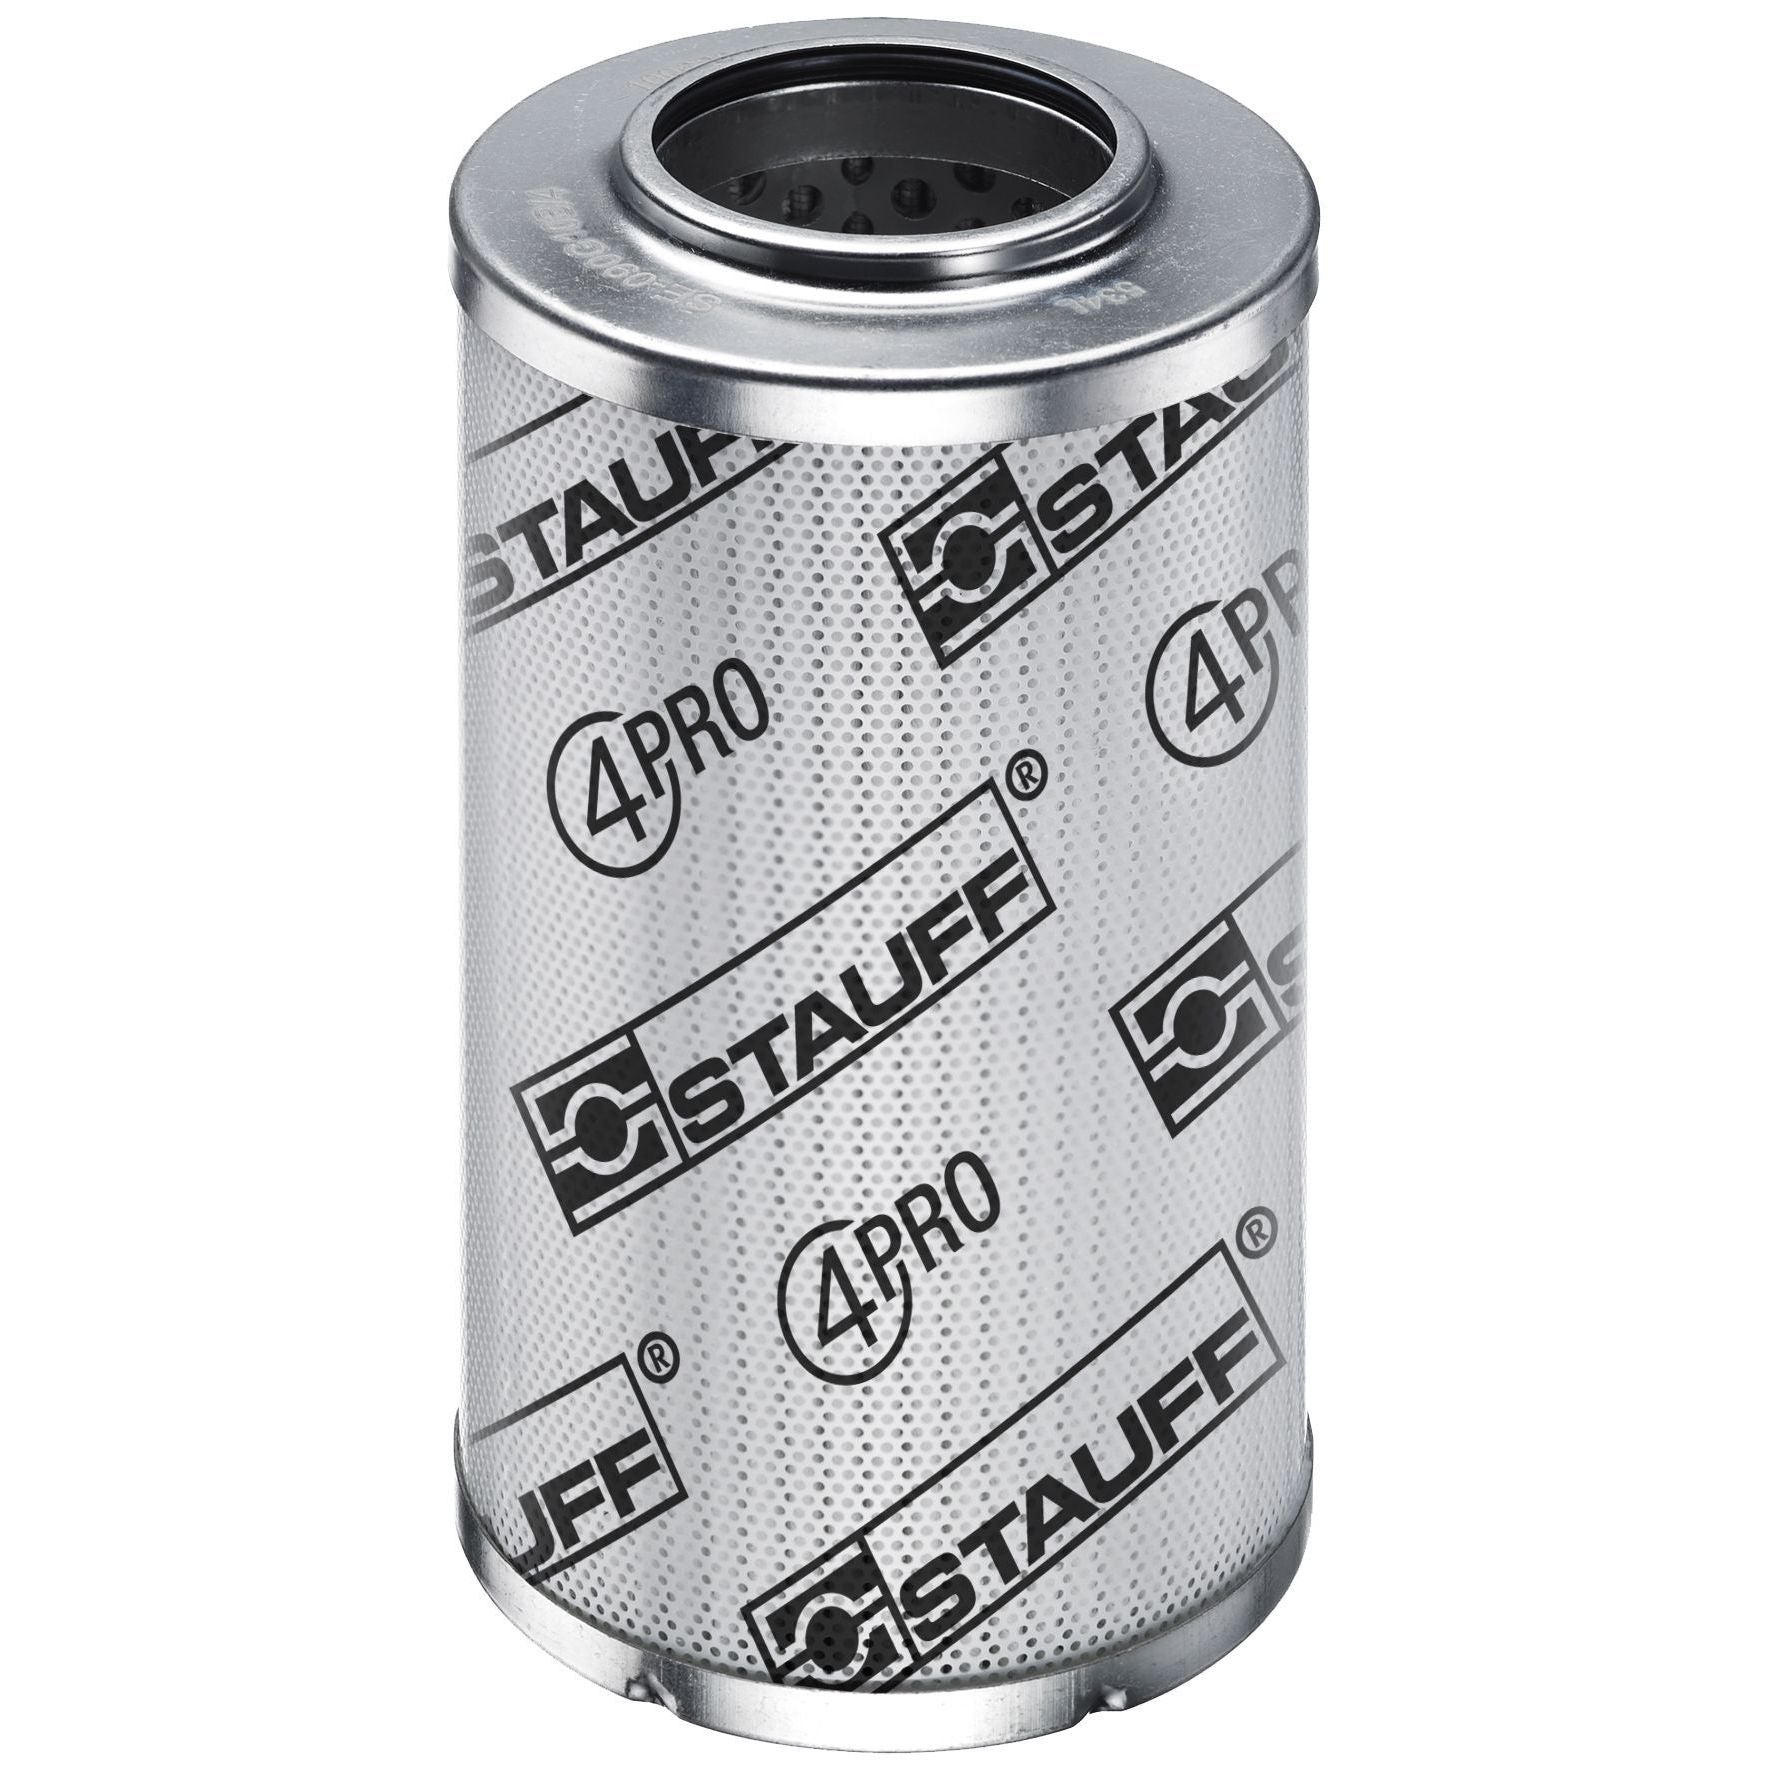 SE-250-H-05-B/4 : Stauff SF-250 Series Filter Element, 5 Micron, Synthetic, 3045psi Collapse Differential, Buna